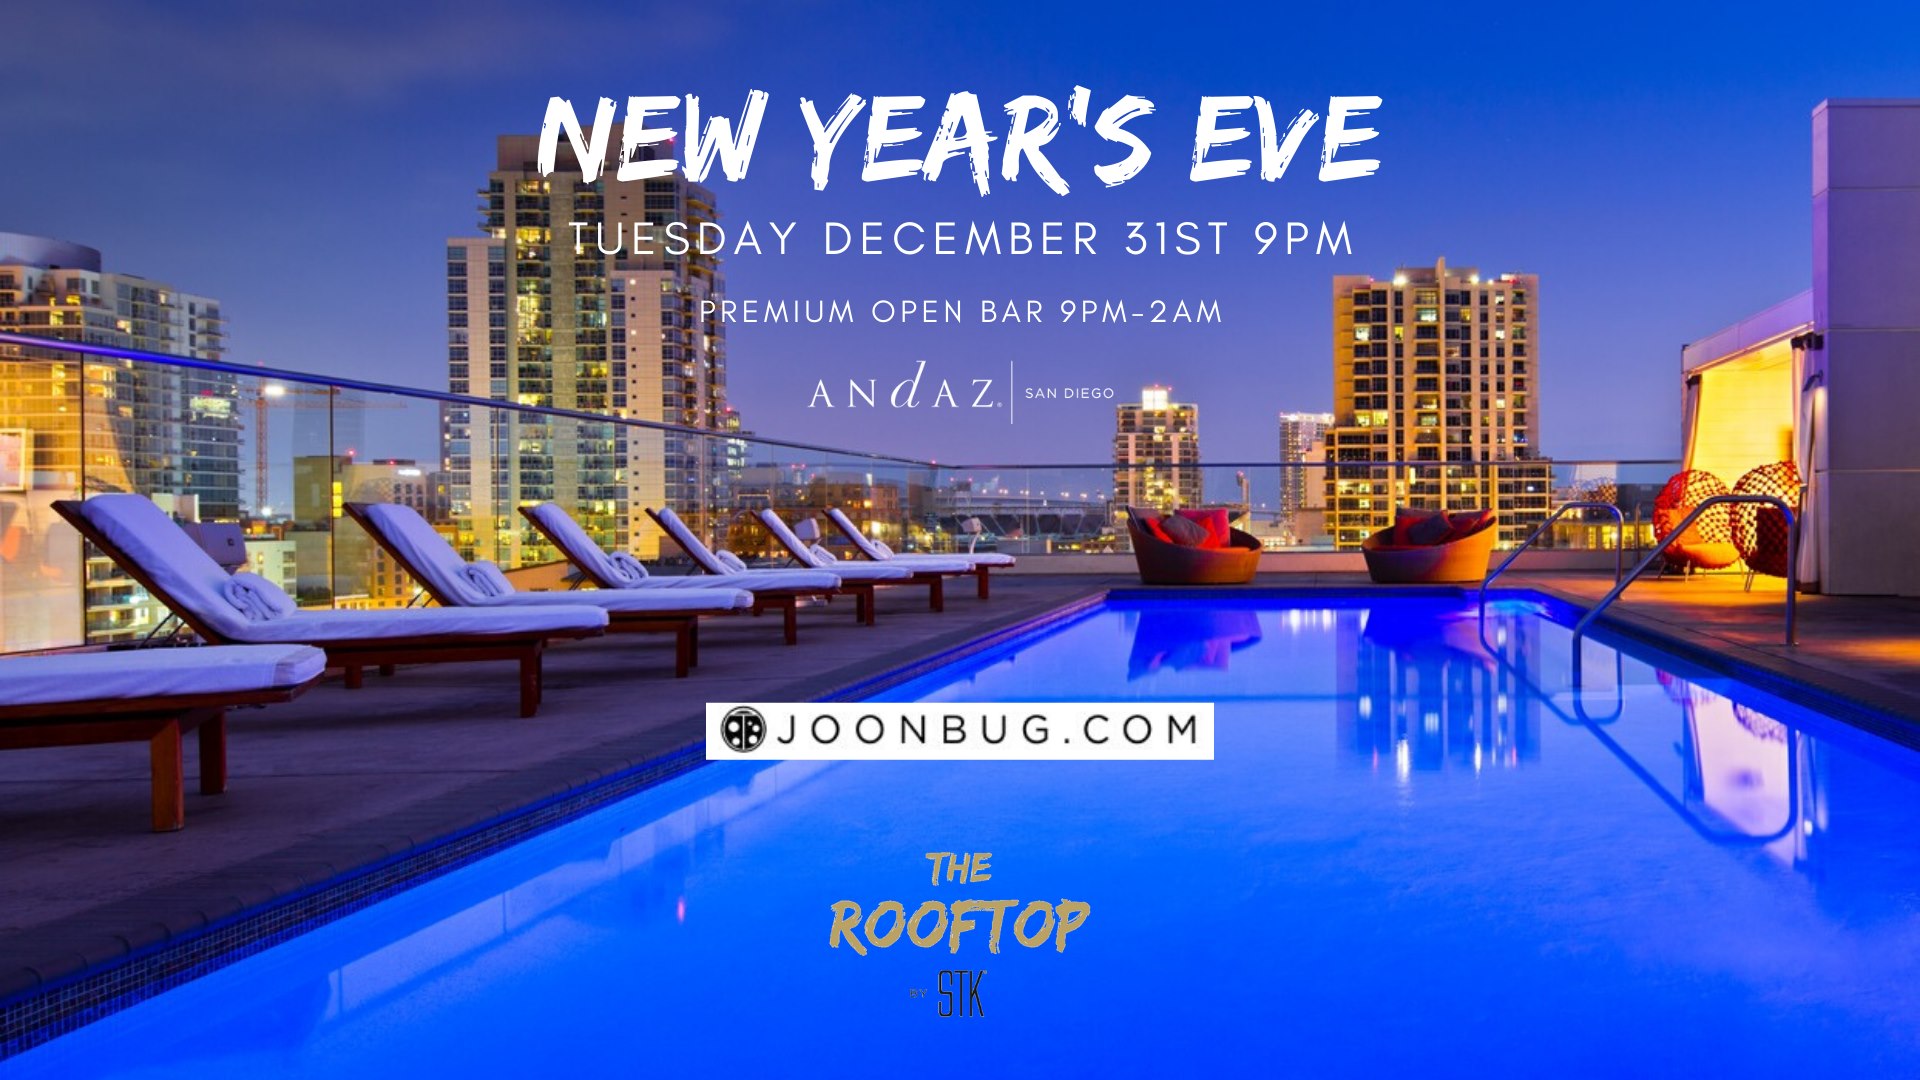 Andaz Hotel Rooftop New Years Eve Party 2020